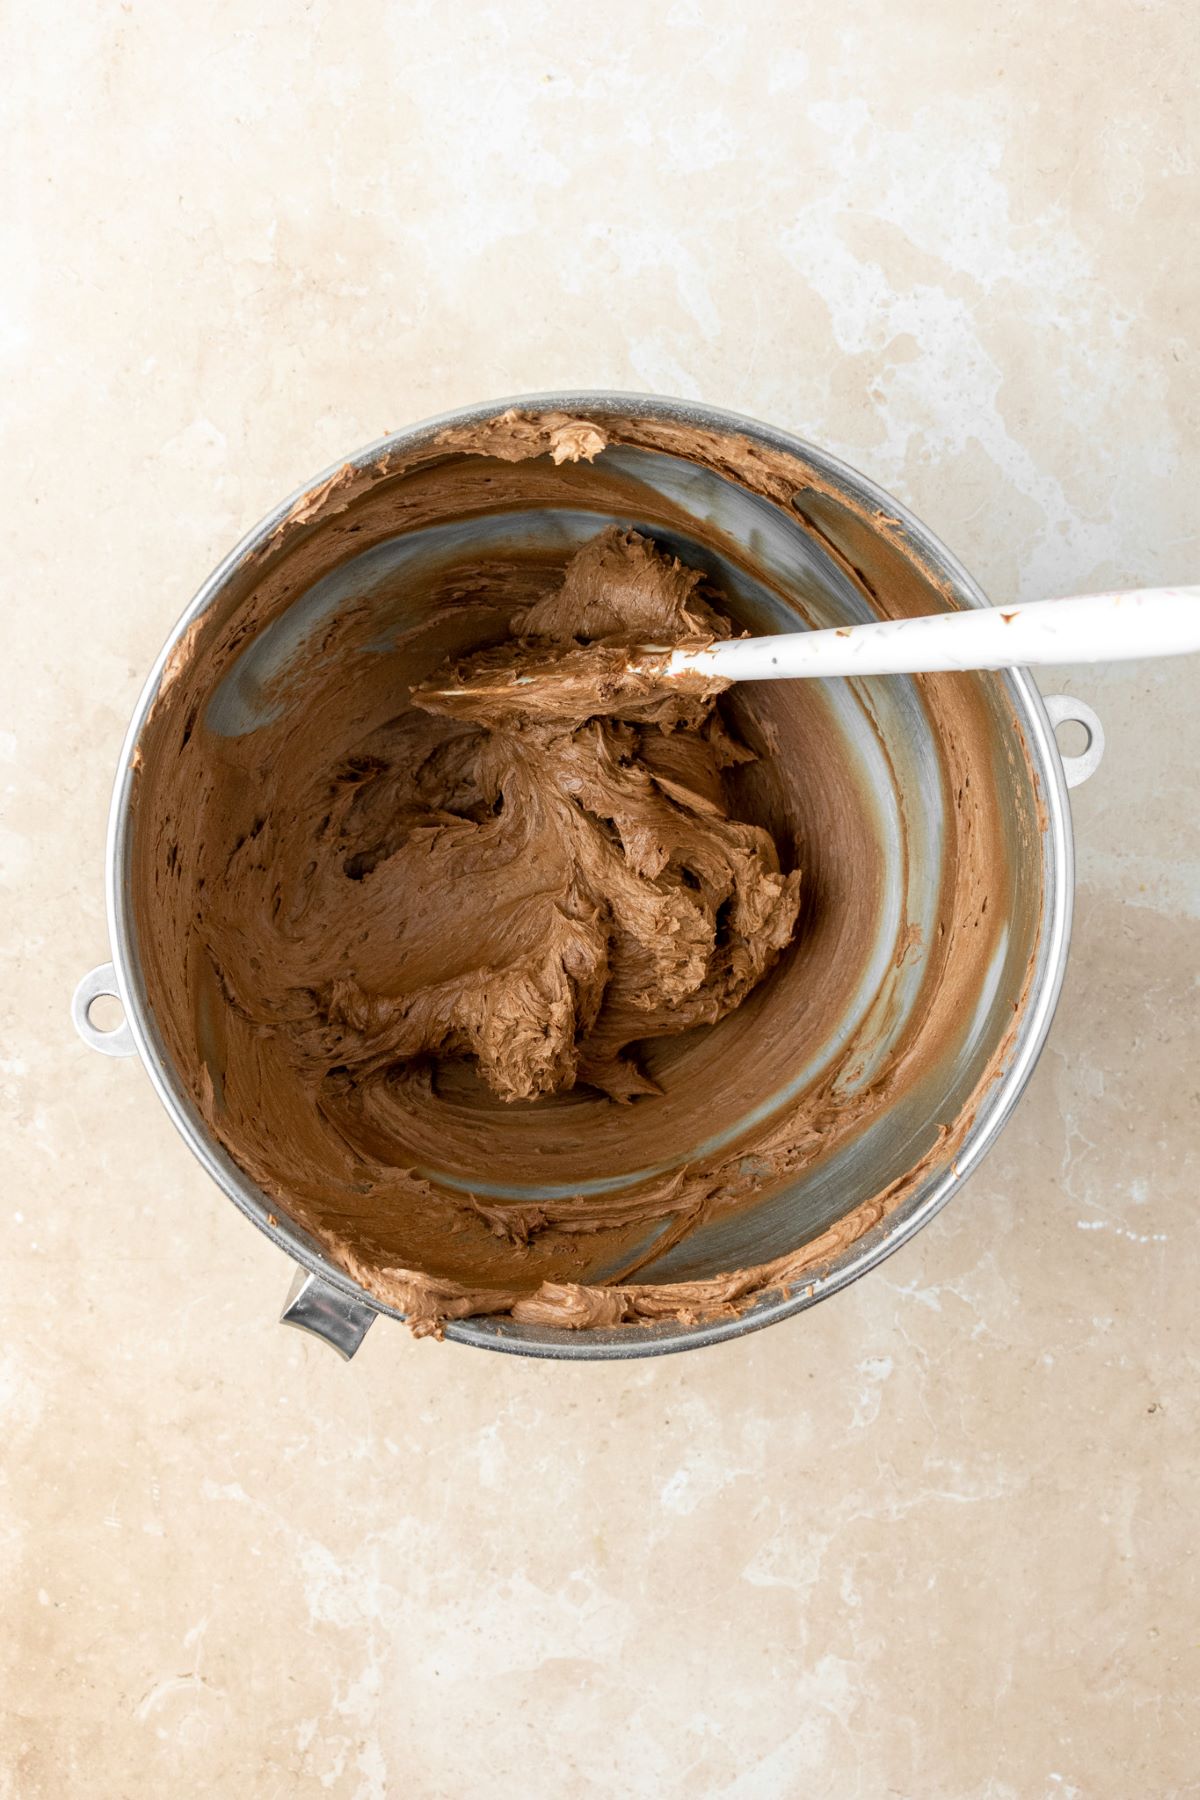 Chocolate frosting in a stainless steel bowl.